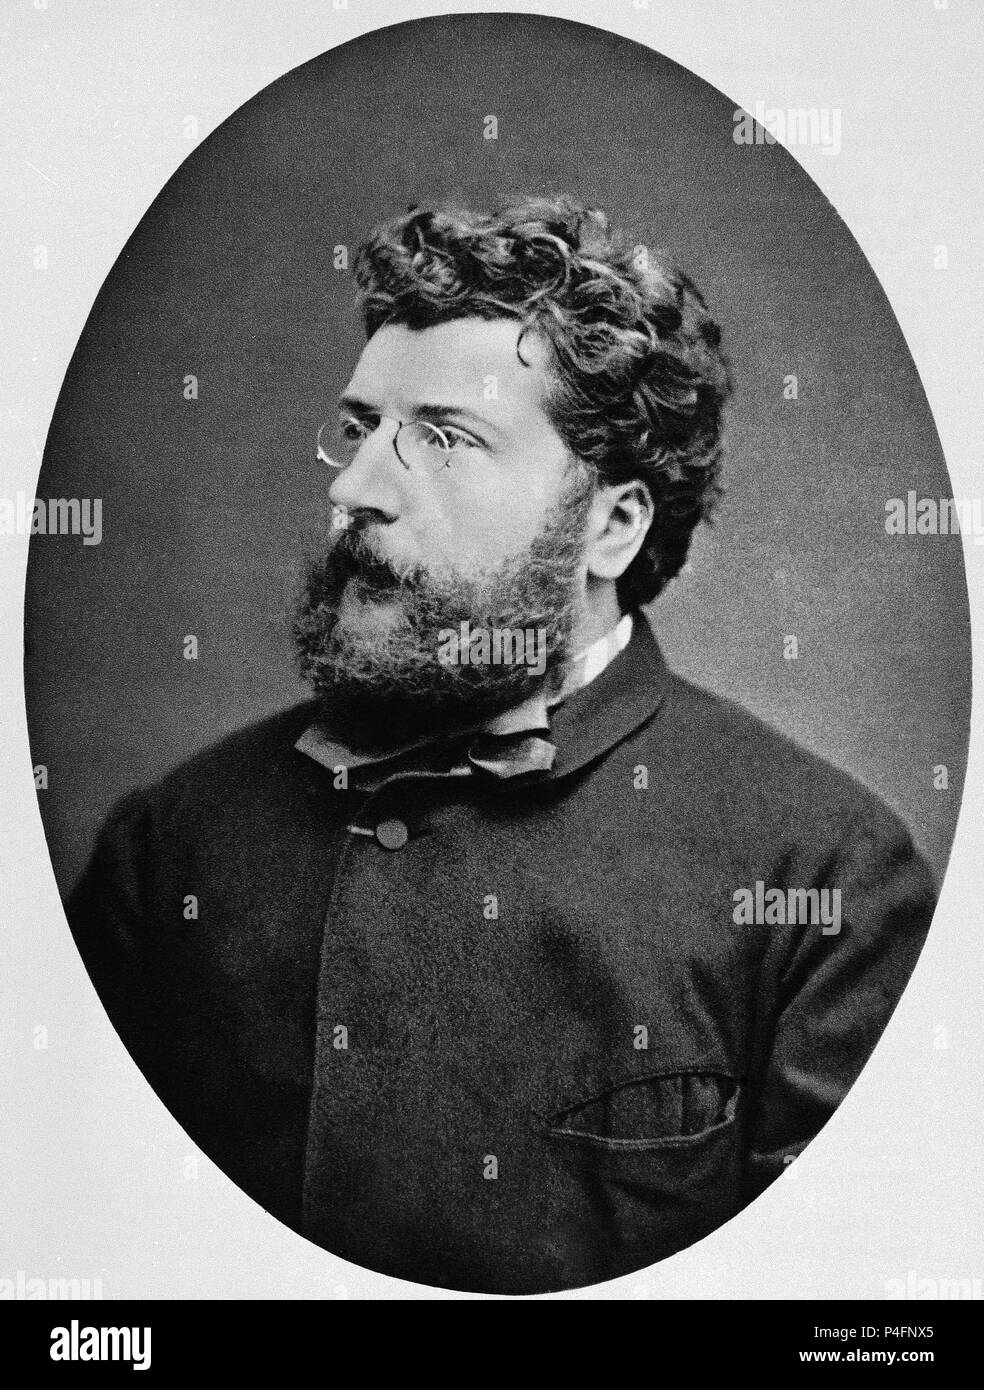 Portrait of Georges Bizet (1838-1875), French composer. Madrid, Institute of Iberoamerican Cooperation. Spain. Location: INSTITUTO DE COOPERACION IBEROAMERICANA, MADRID, SPAIN. Stock Photo